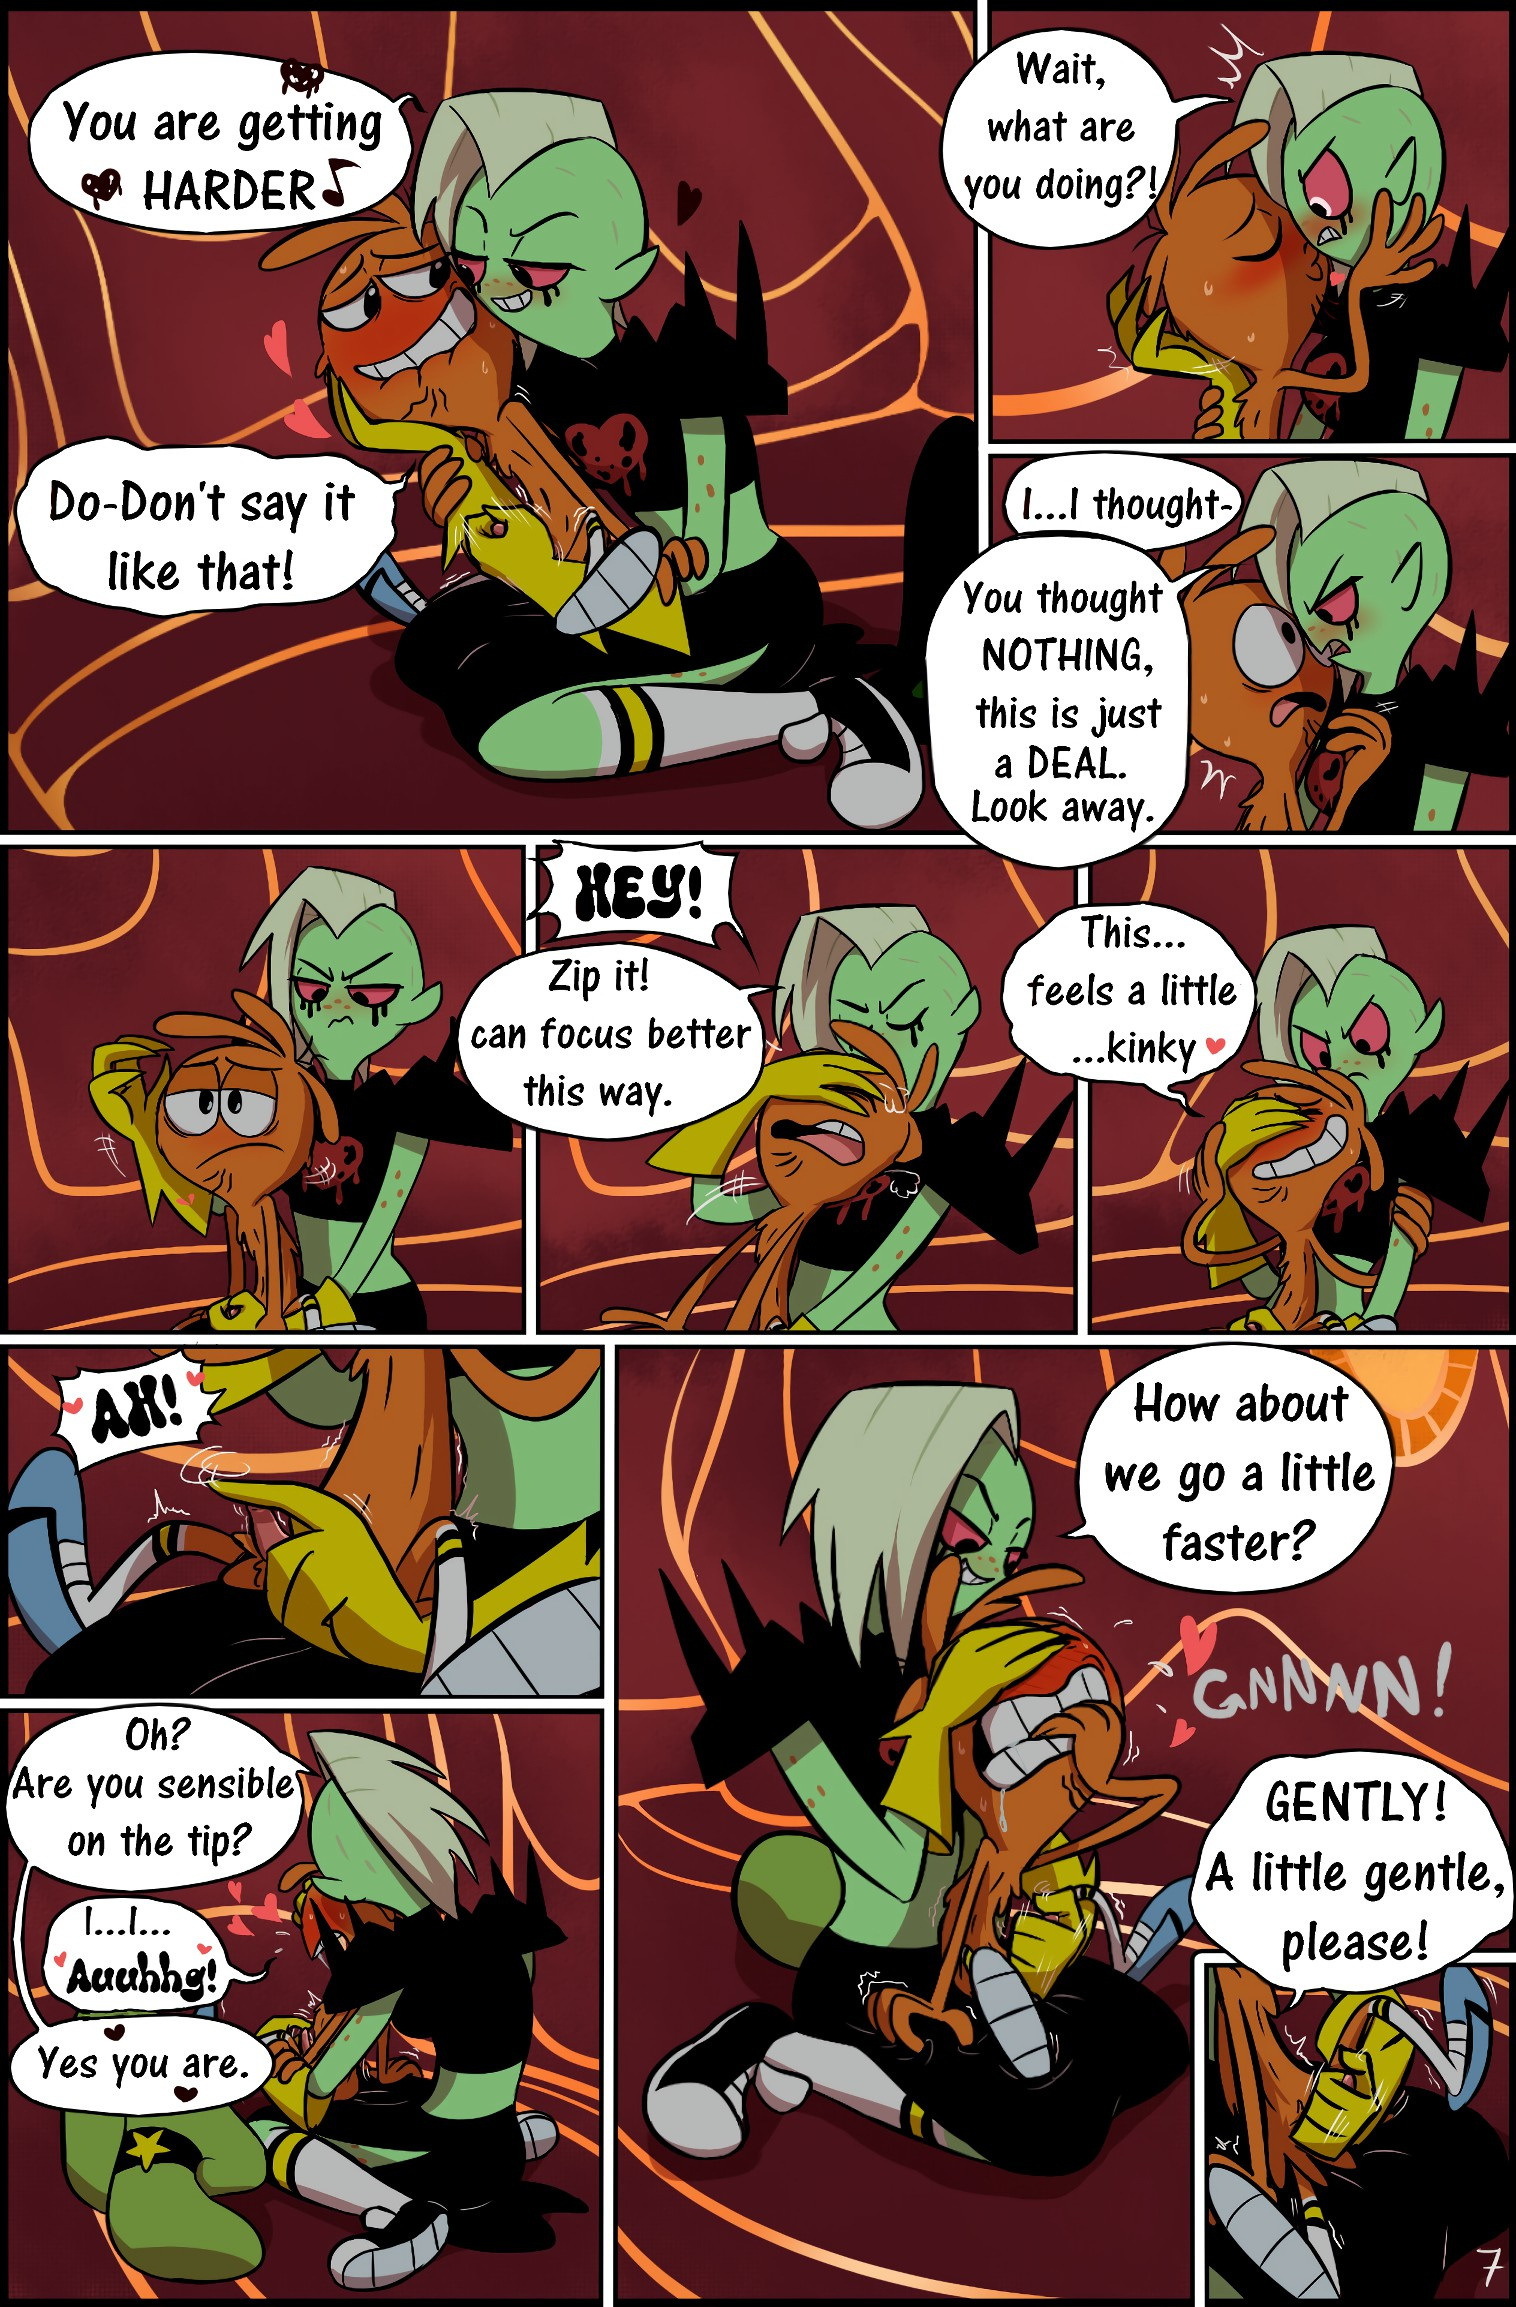 The Deal - Wander Over Yonder - Page 8